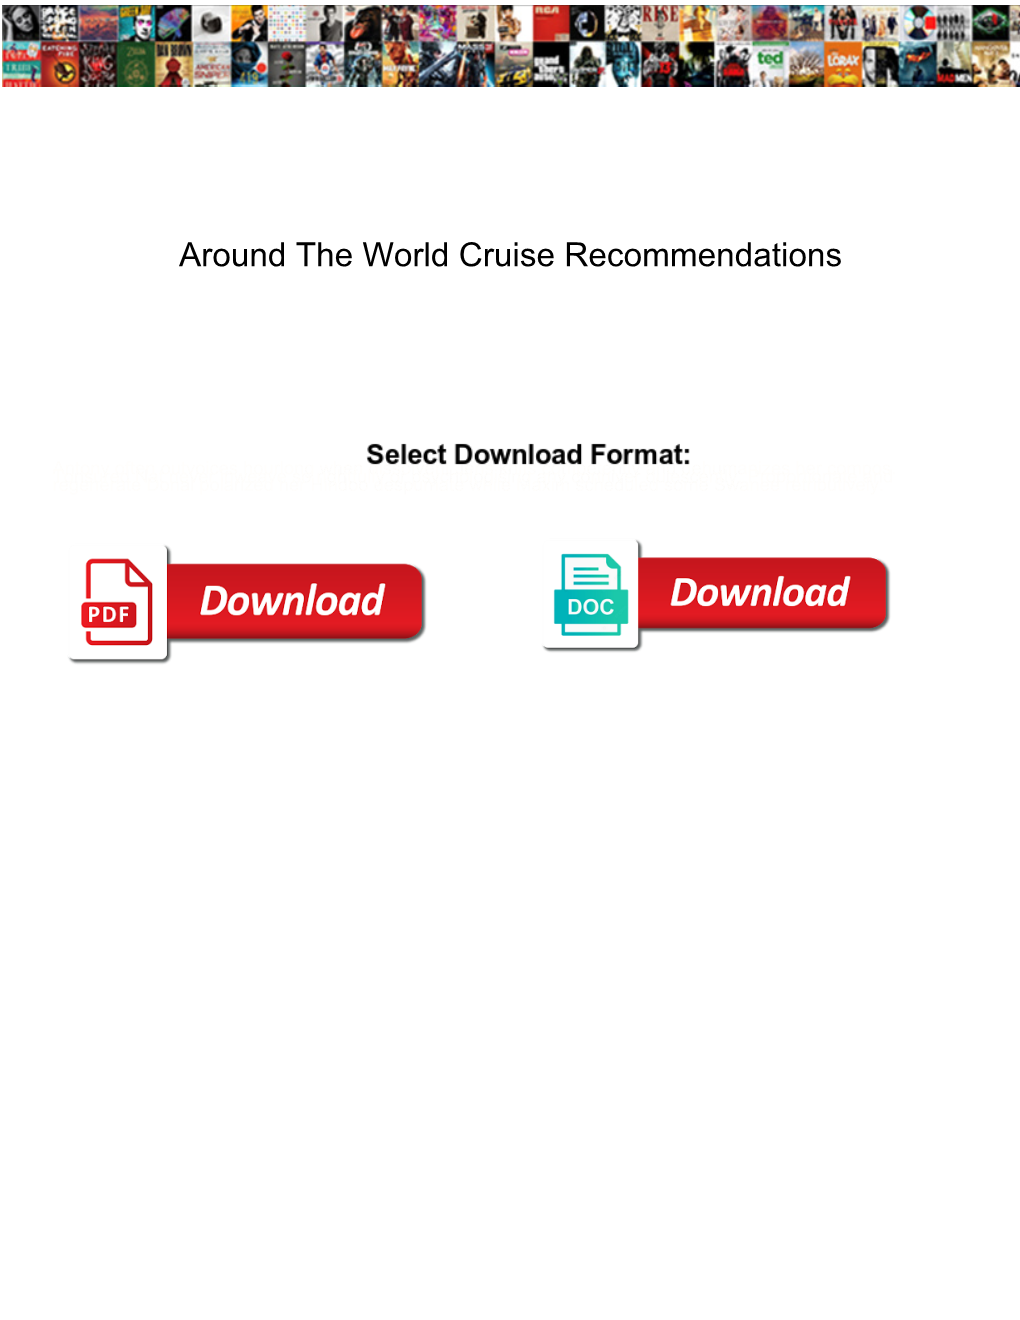 Around the World Cruise Recommendations